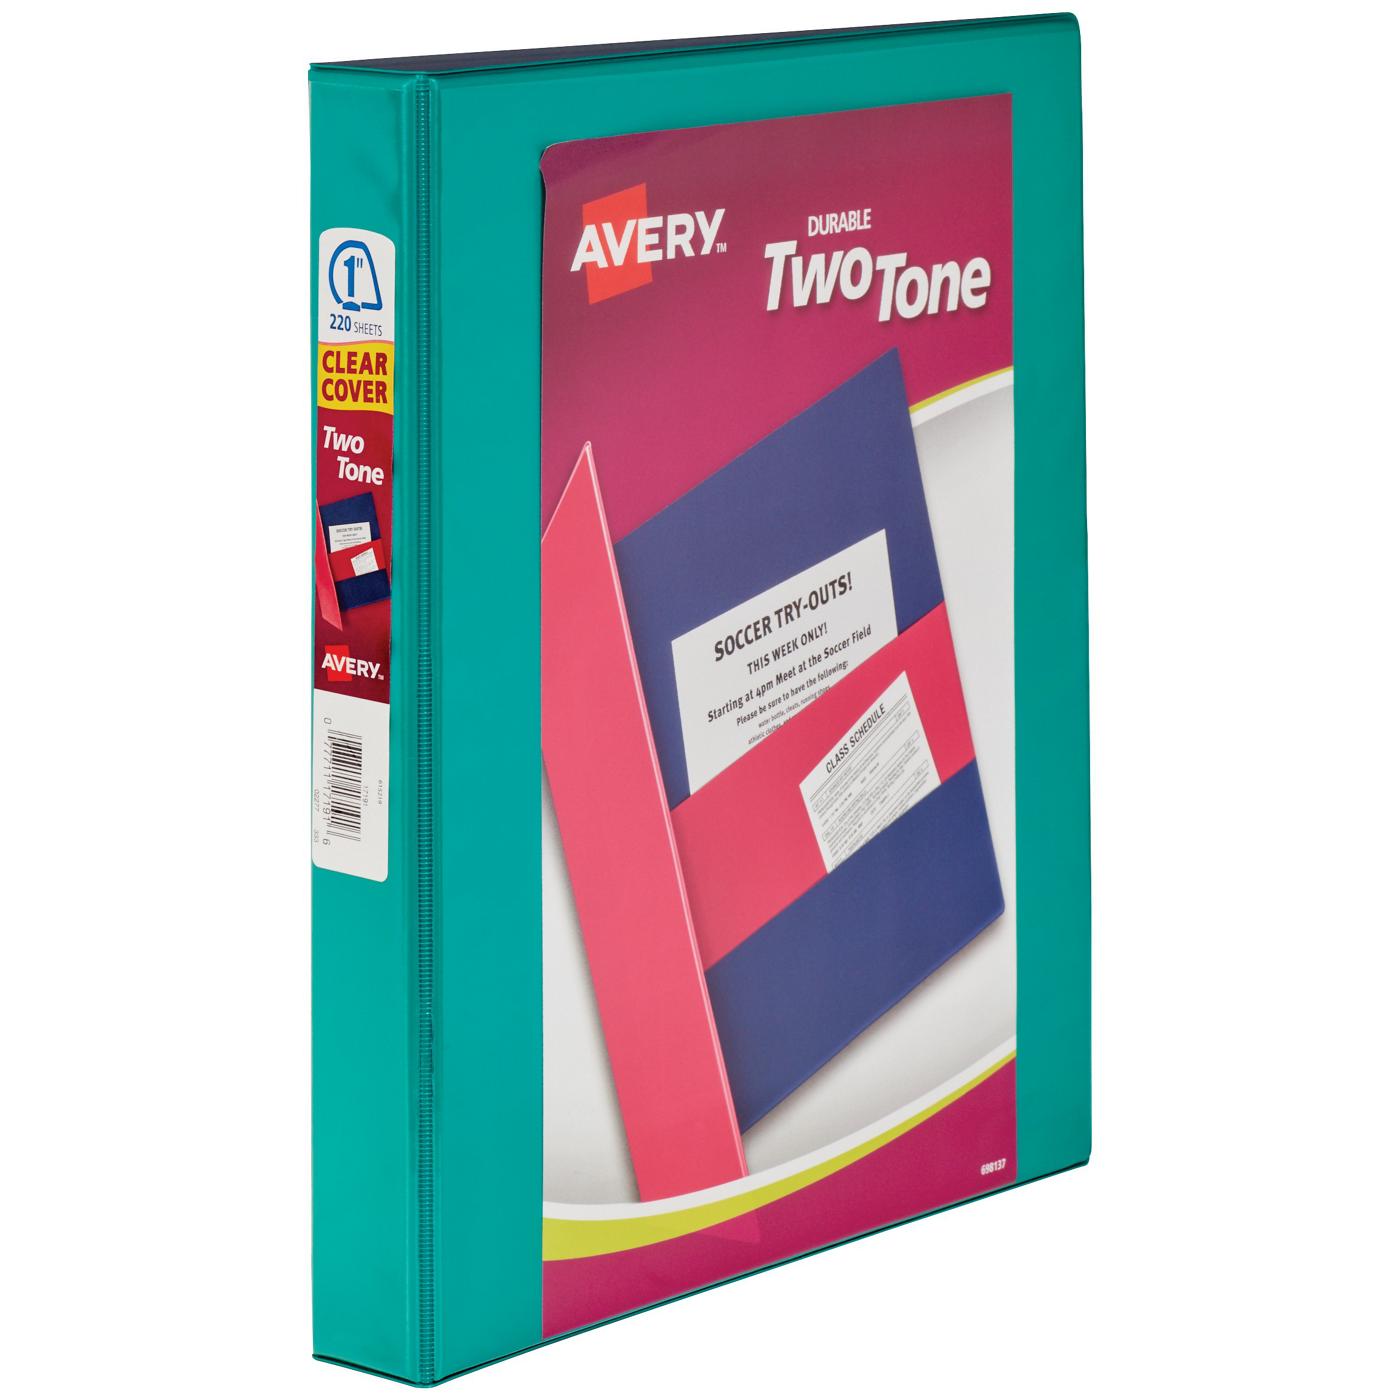 Avery Durable Binder Two Tone Assortment; image 3 of 3